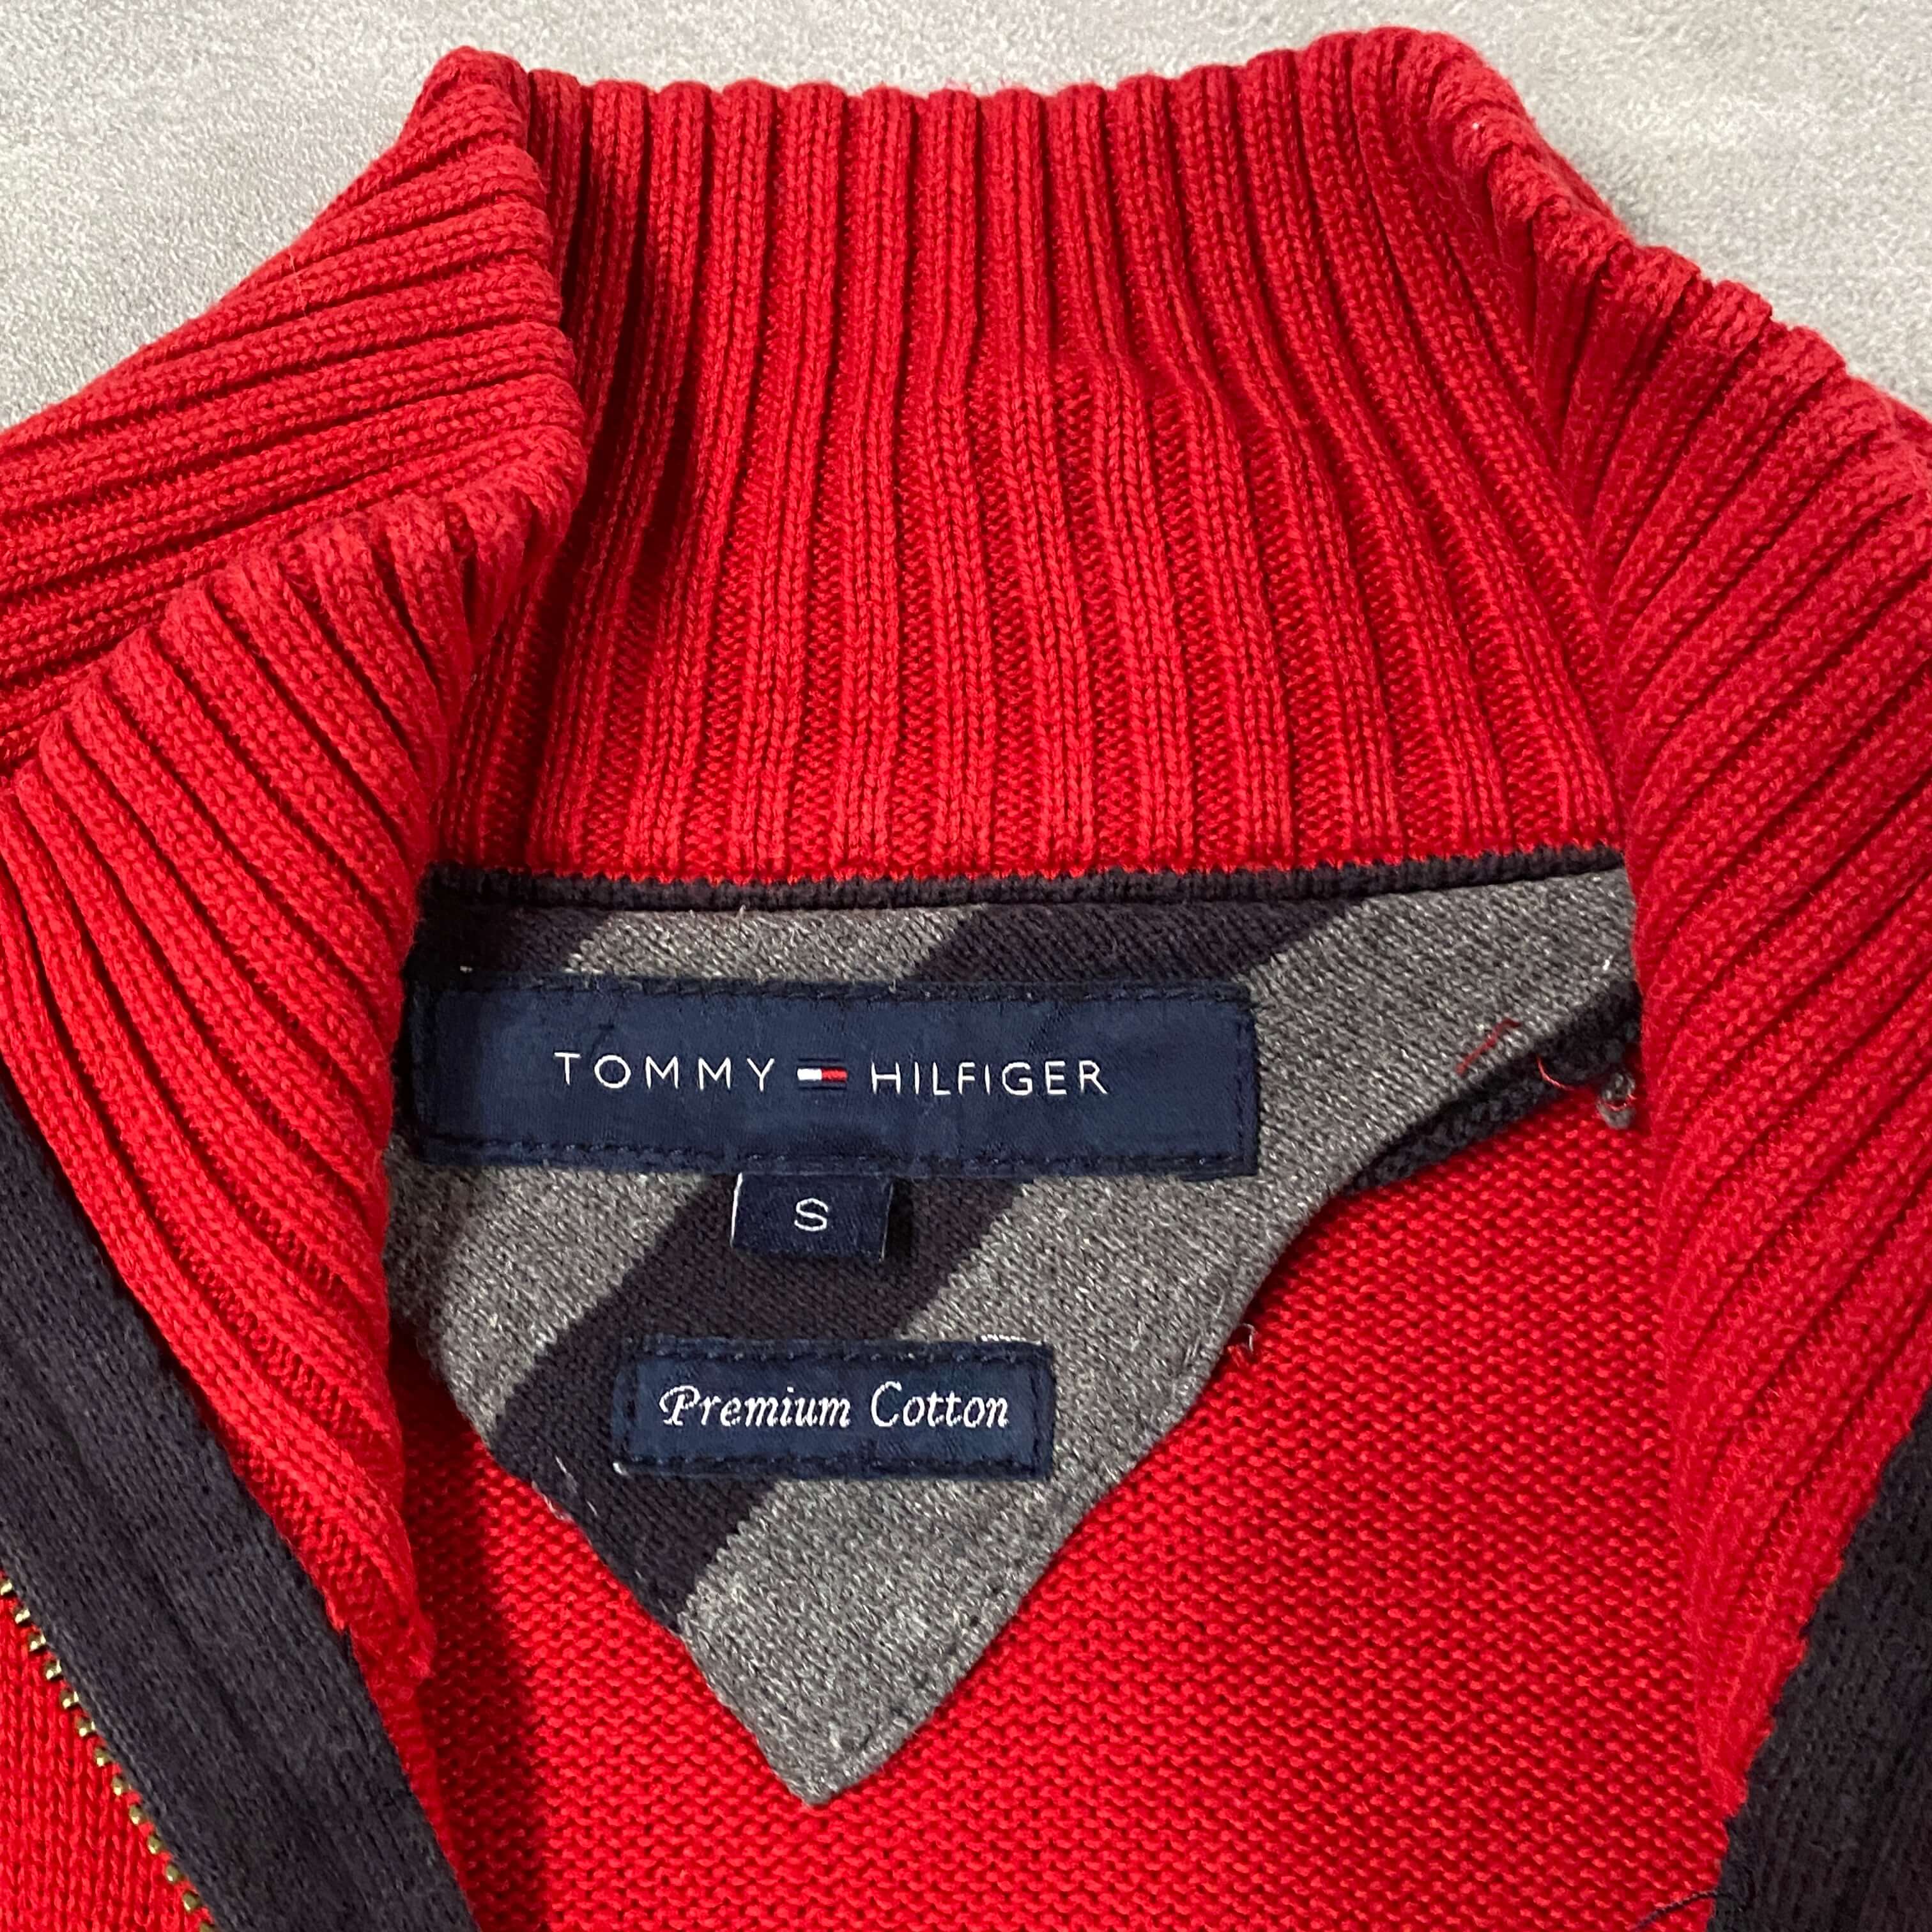 RED HILFIGER FRONT LOGO EMBROIDED QUARTER ZIP UP SWEATER | awevintageclothing